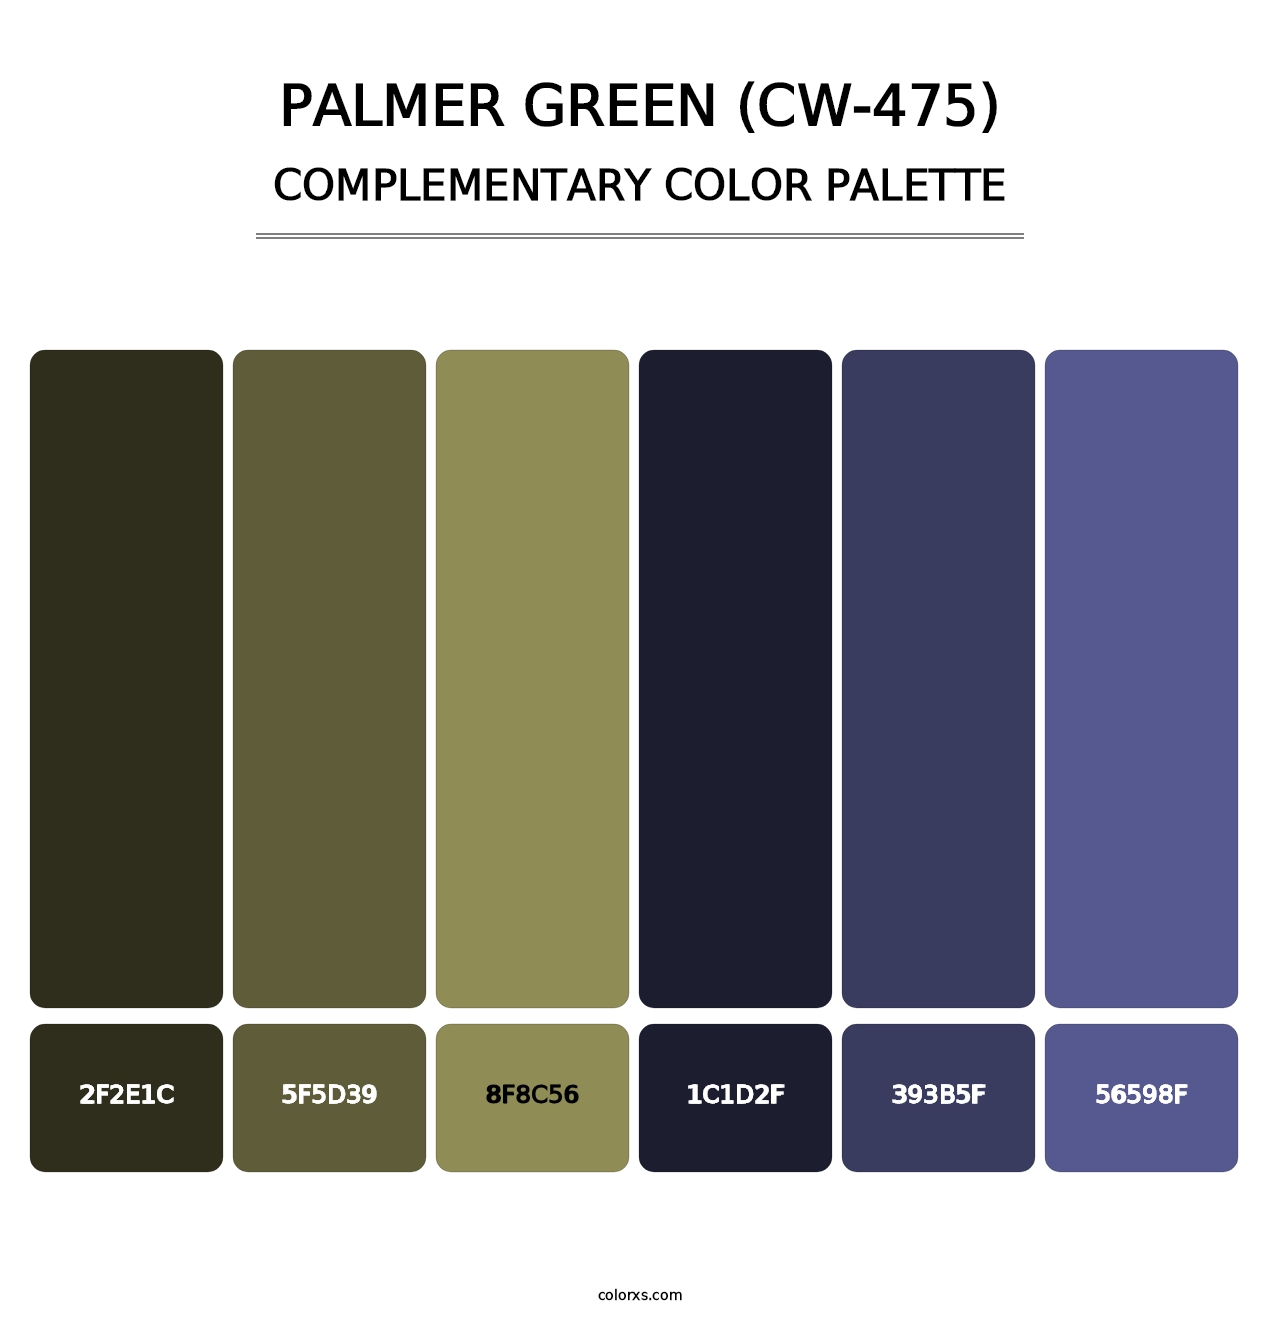 Palmer Green (CW-475) - Complementary Color Palette